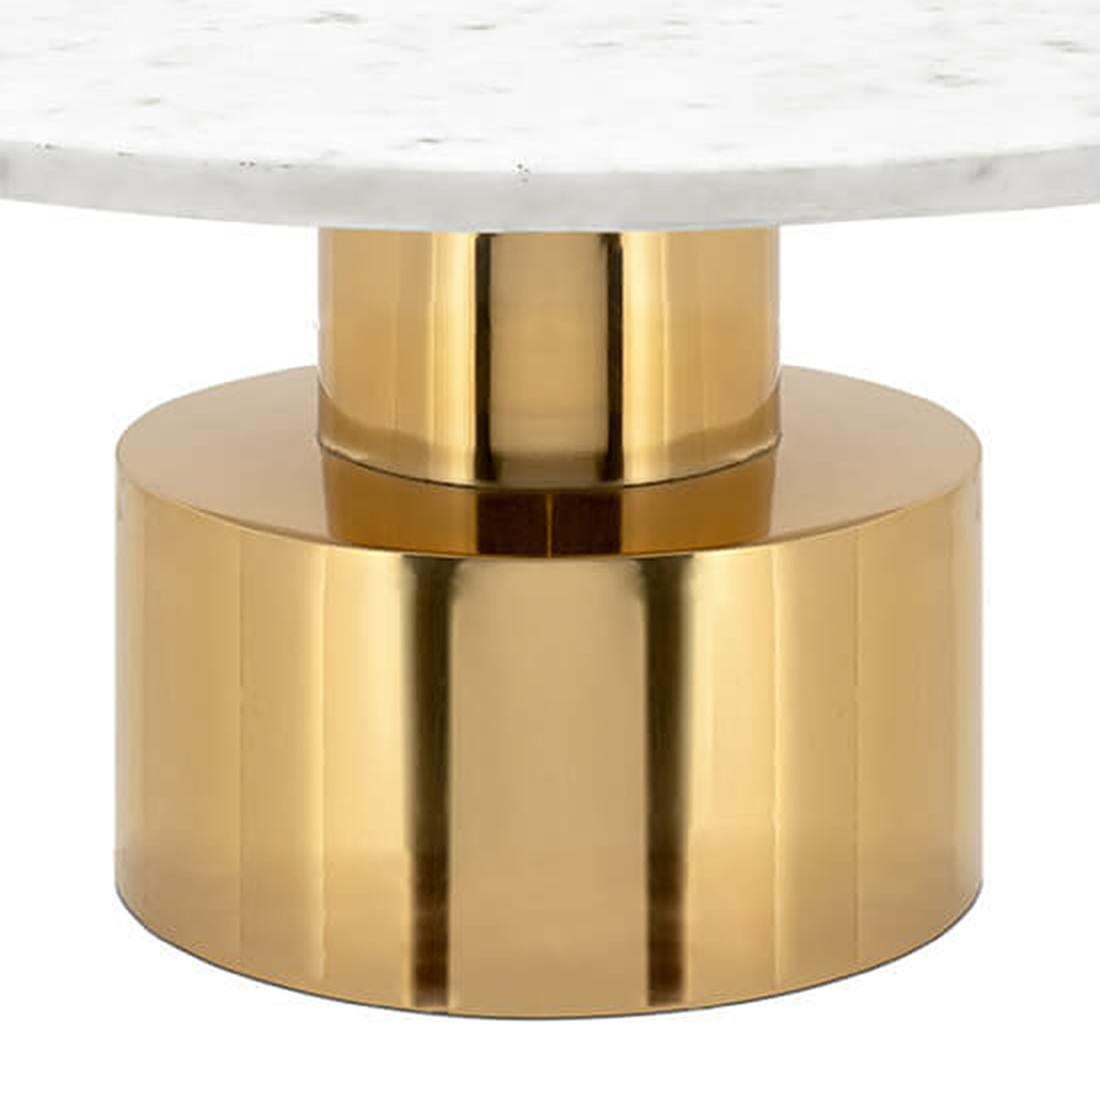 Coffee table white stone with polished and
Gilded metal base. With white stone top.